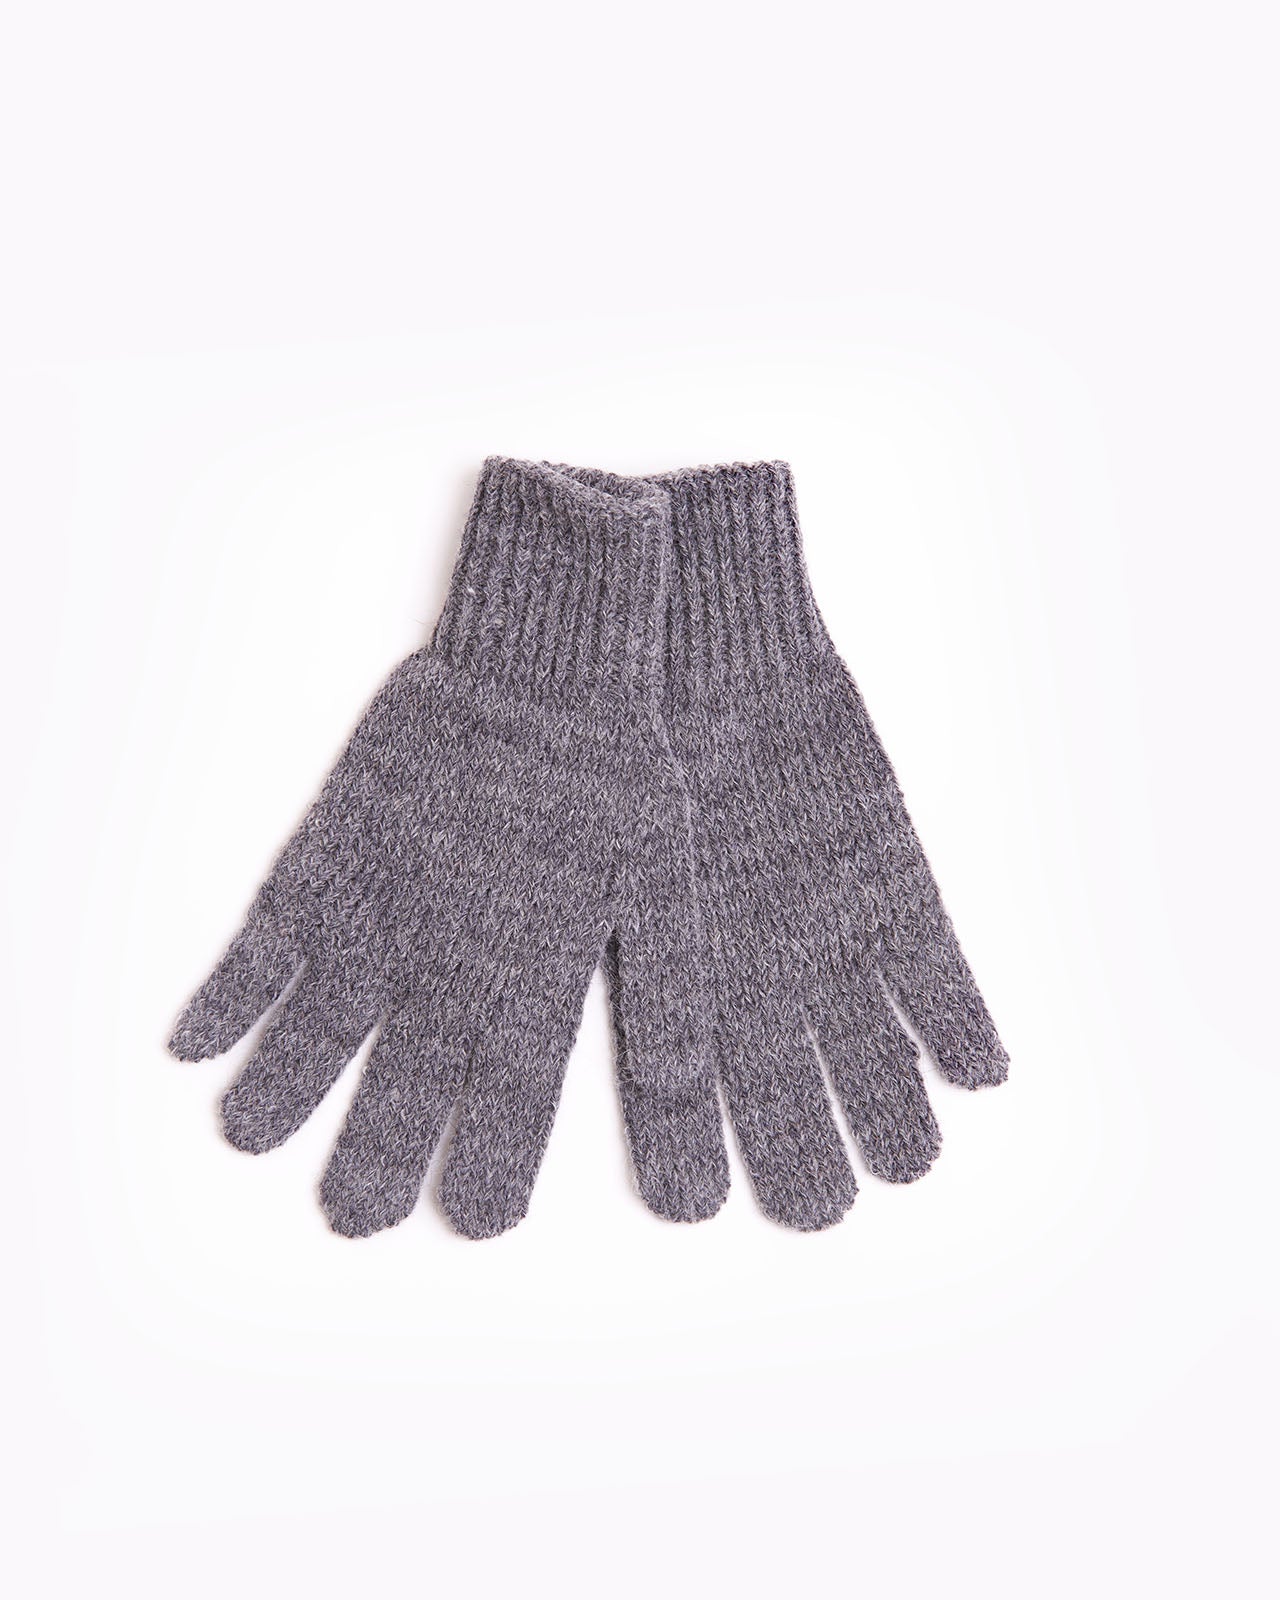 Wool gloves and mittens